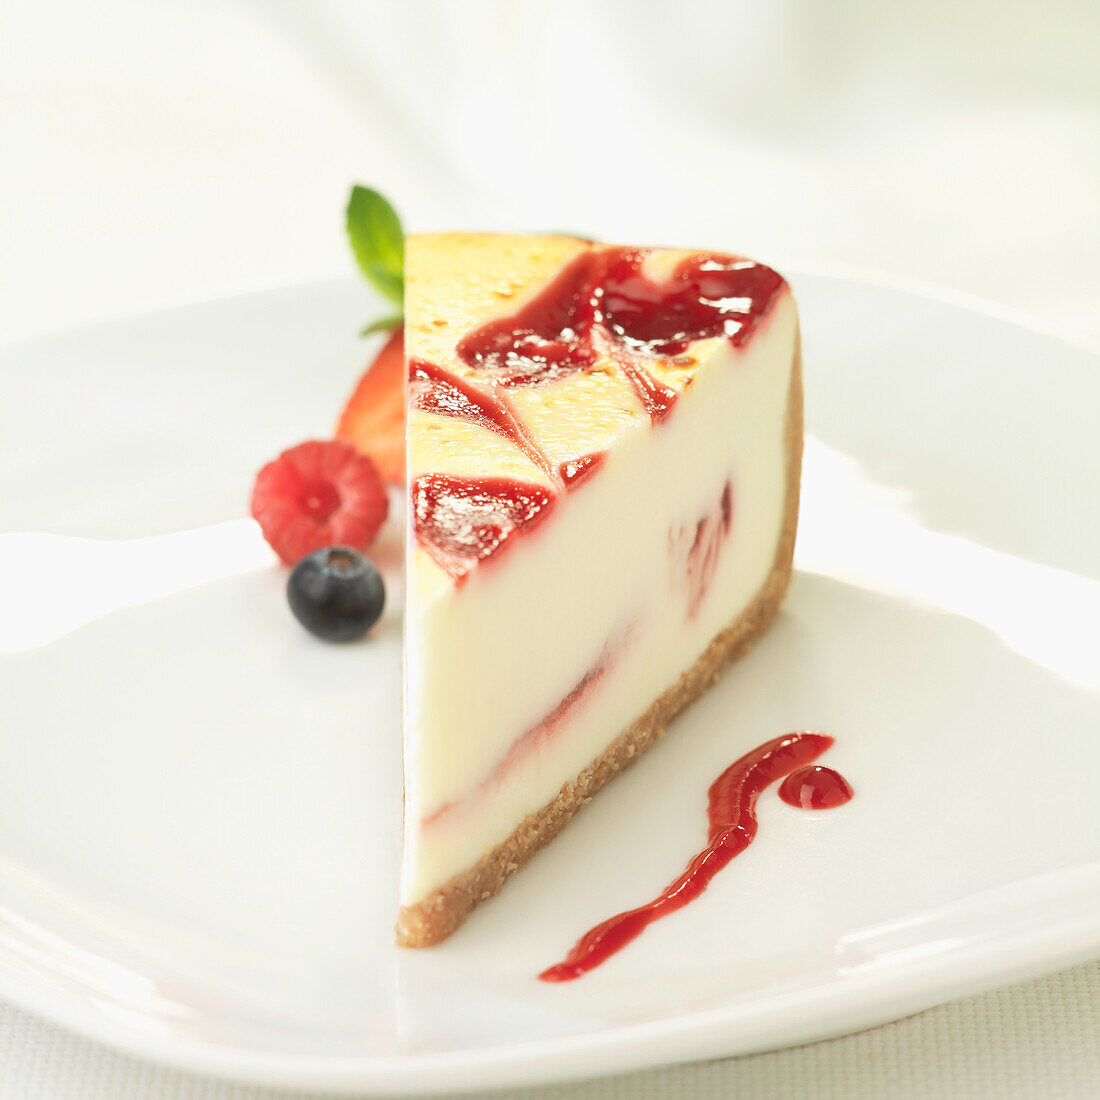 A slice of cheesecake with red berry coulis